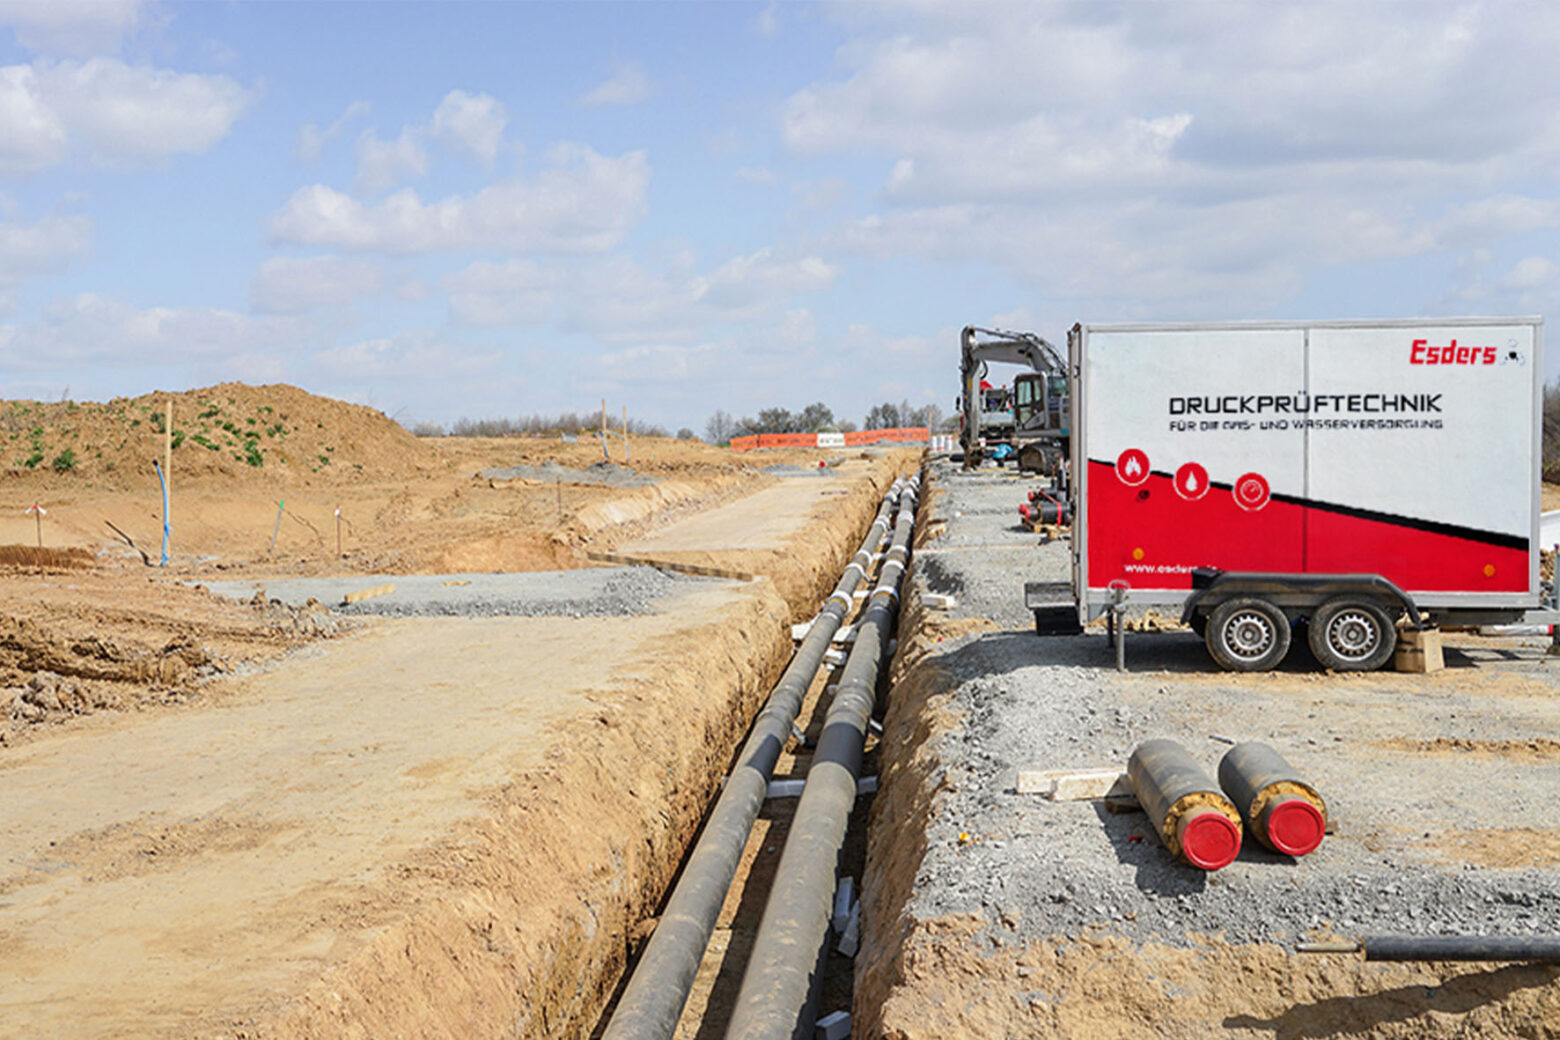 District heating track construction site with a pressure test trailer